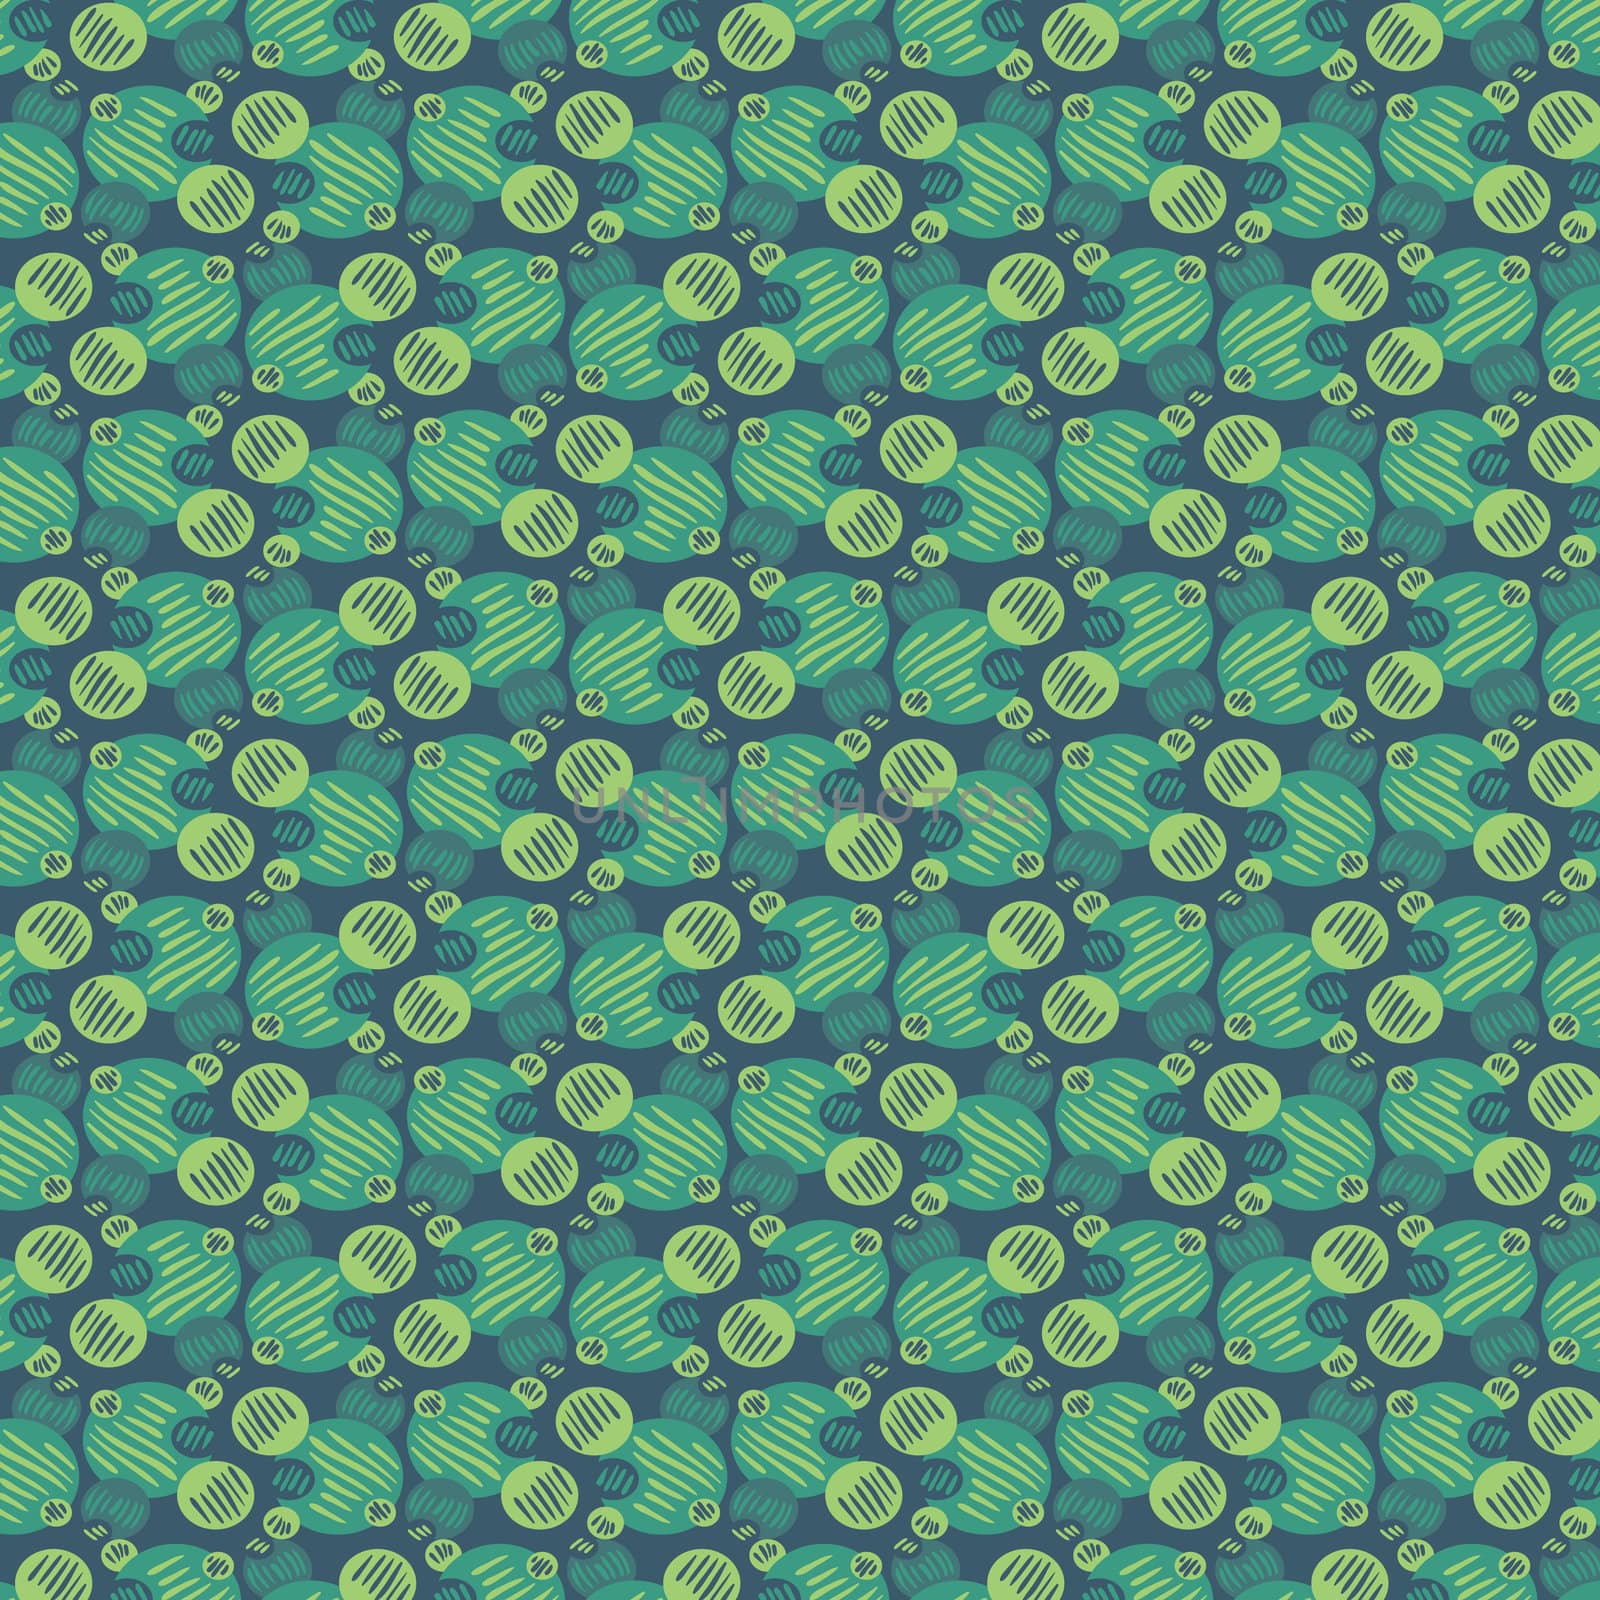 A green pattern with circles and lines